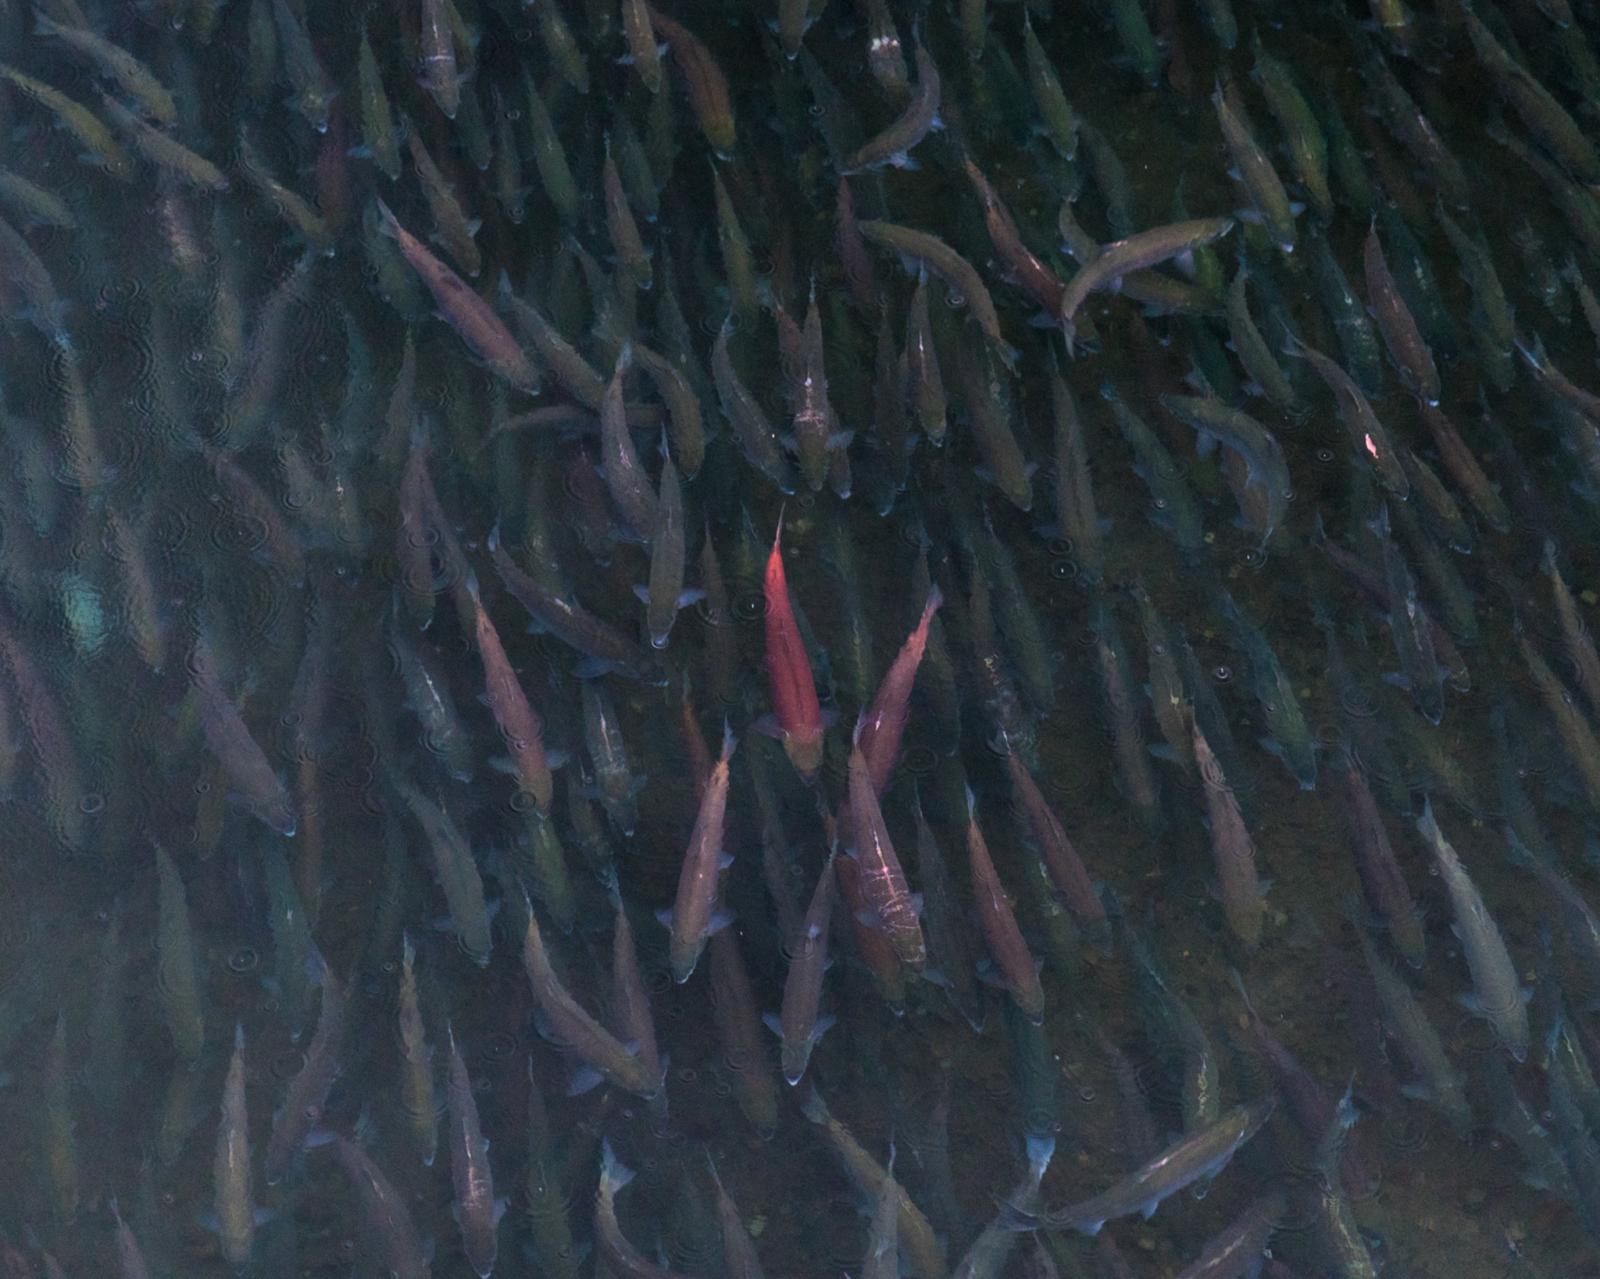 Tremendous numbers of sockeye s.... The bears come for the fish. 